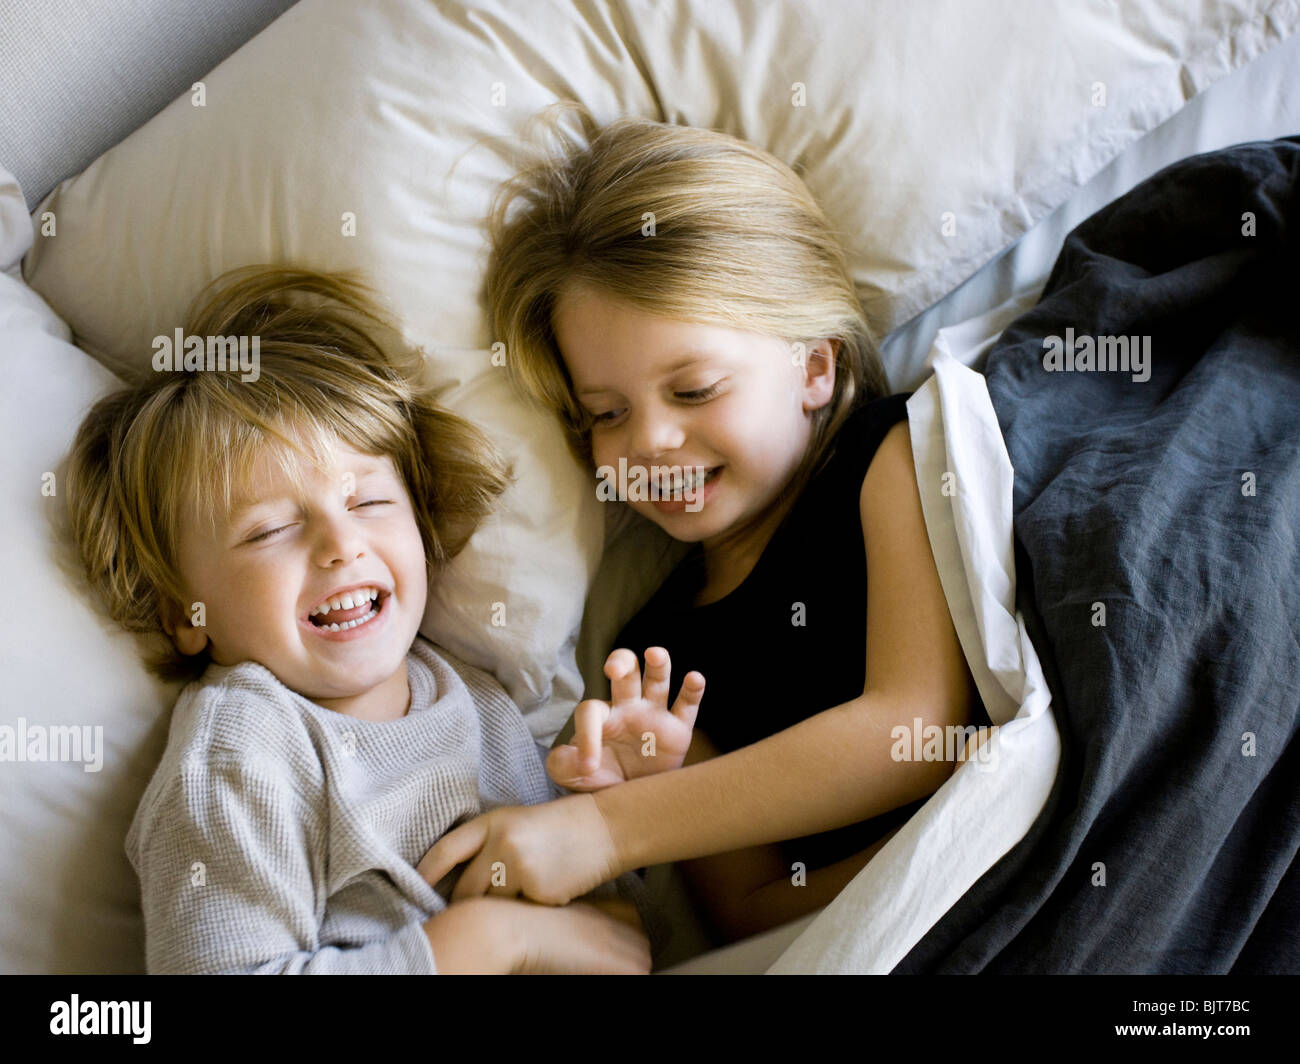 USA, Utah, Provo, Brother and sister (2-5) lying in bed Stock Photo